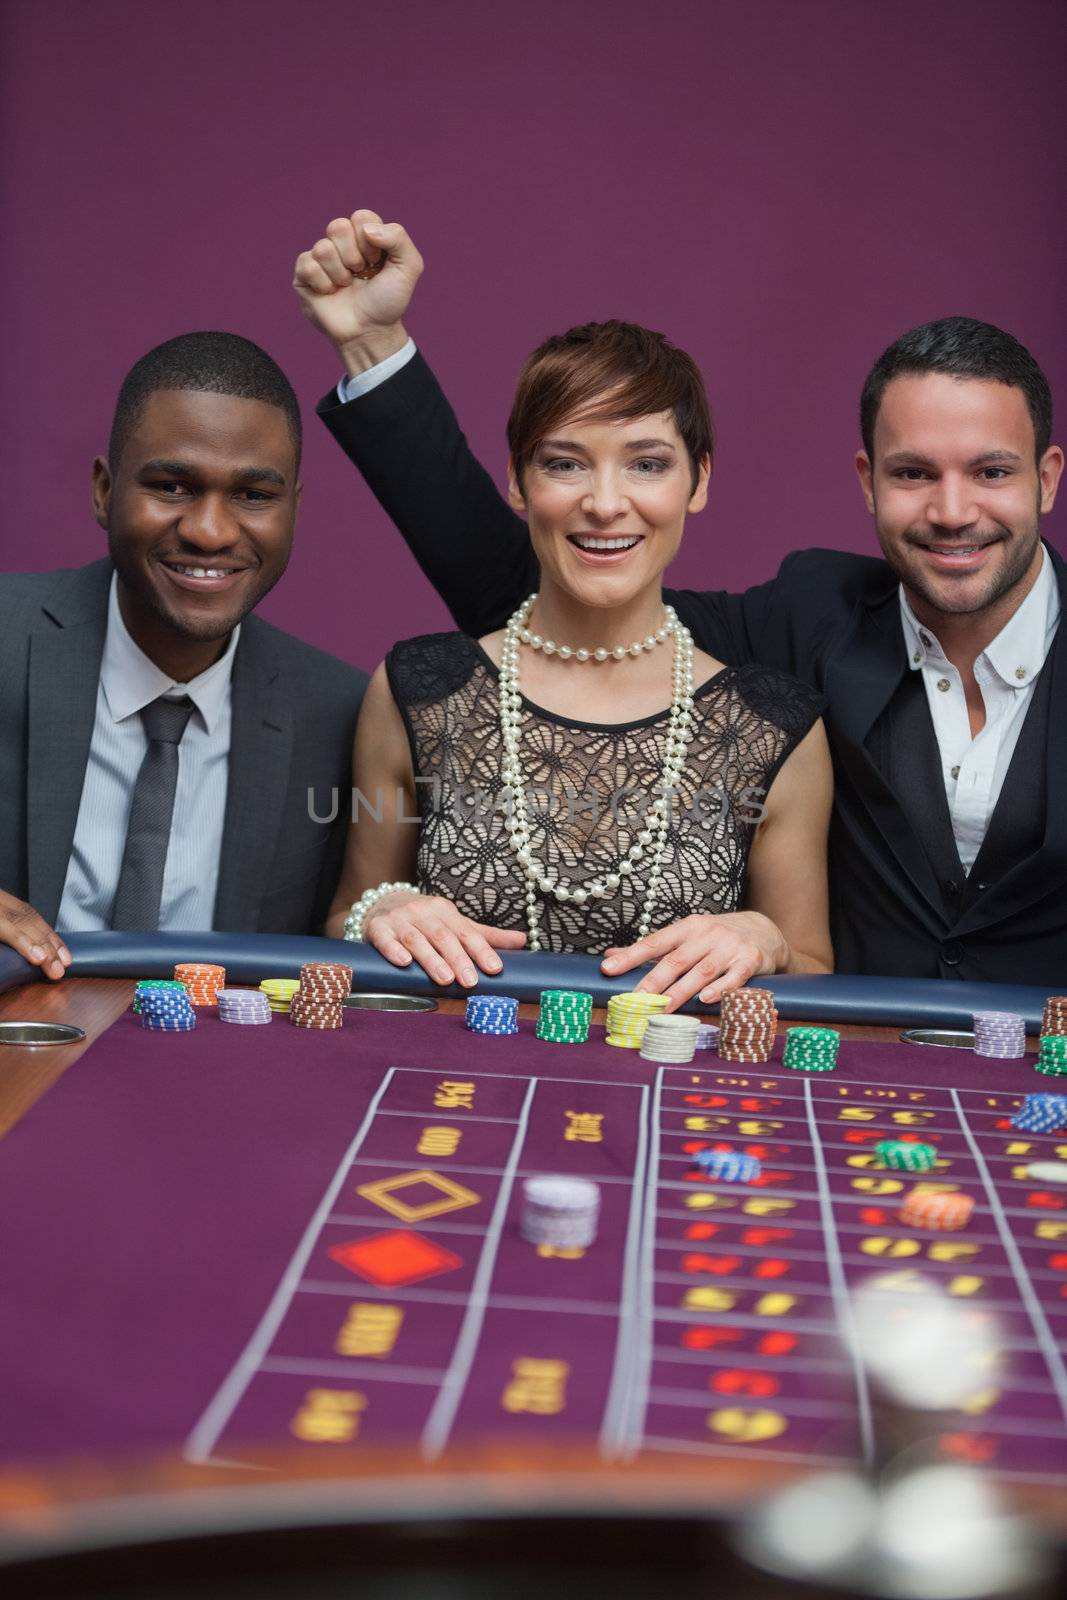 Three happy people at roulette table by Wavebreakmedia